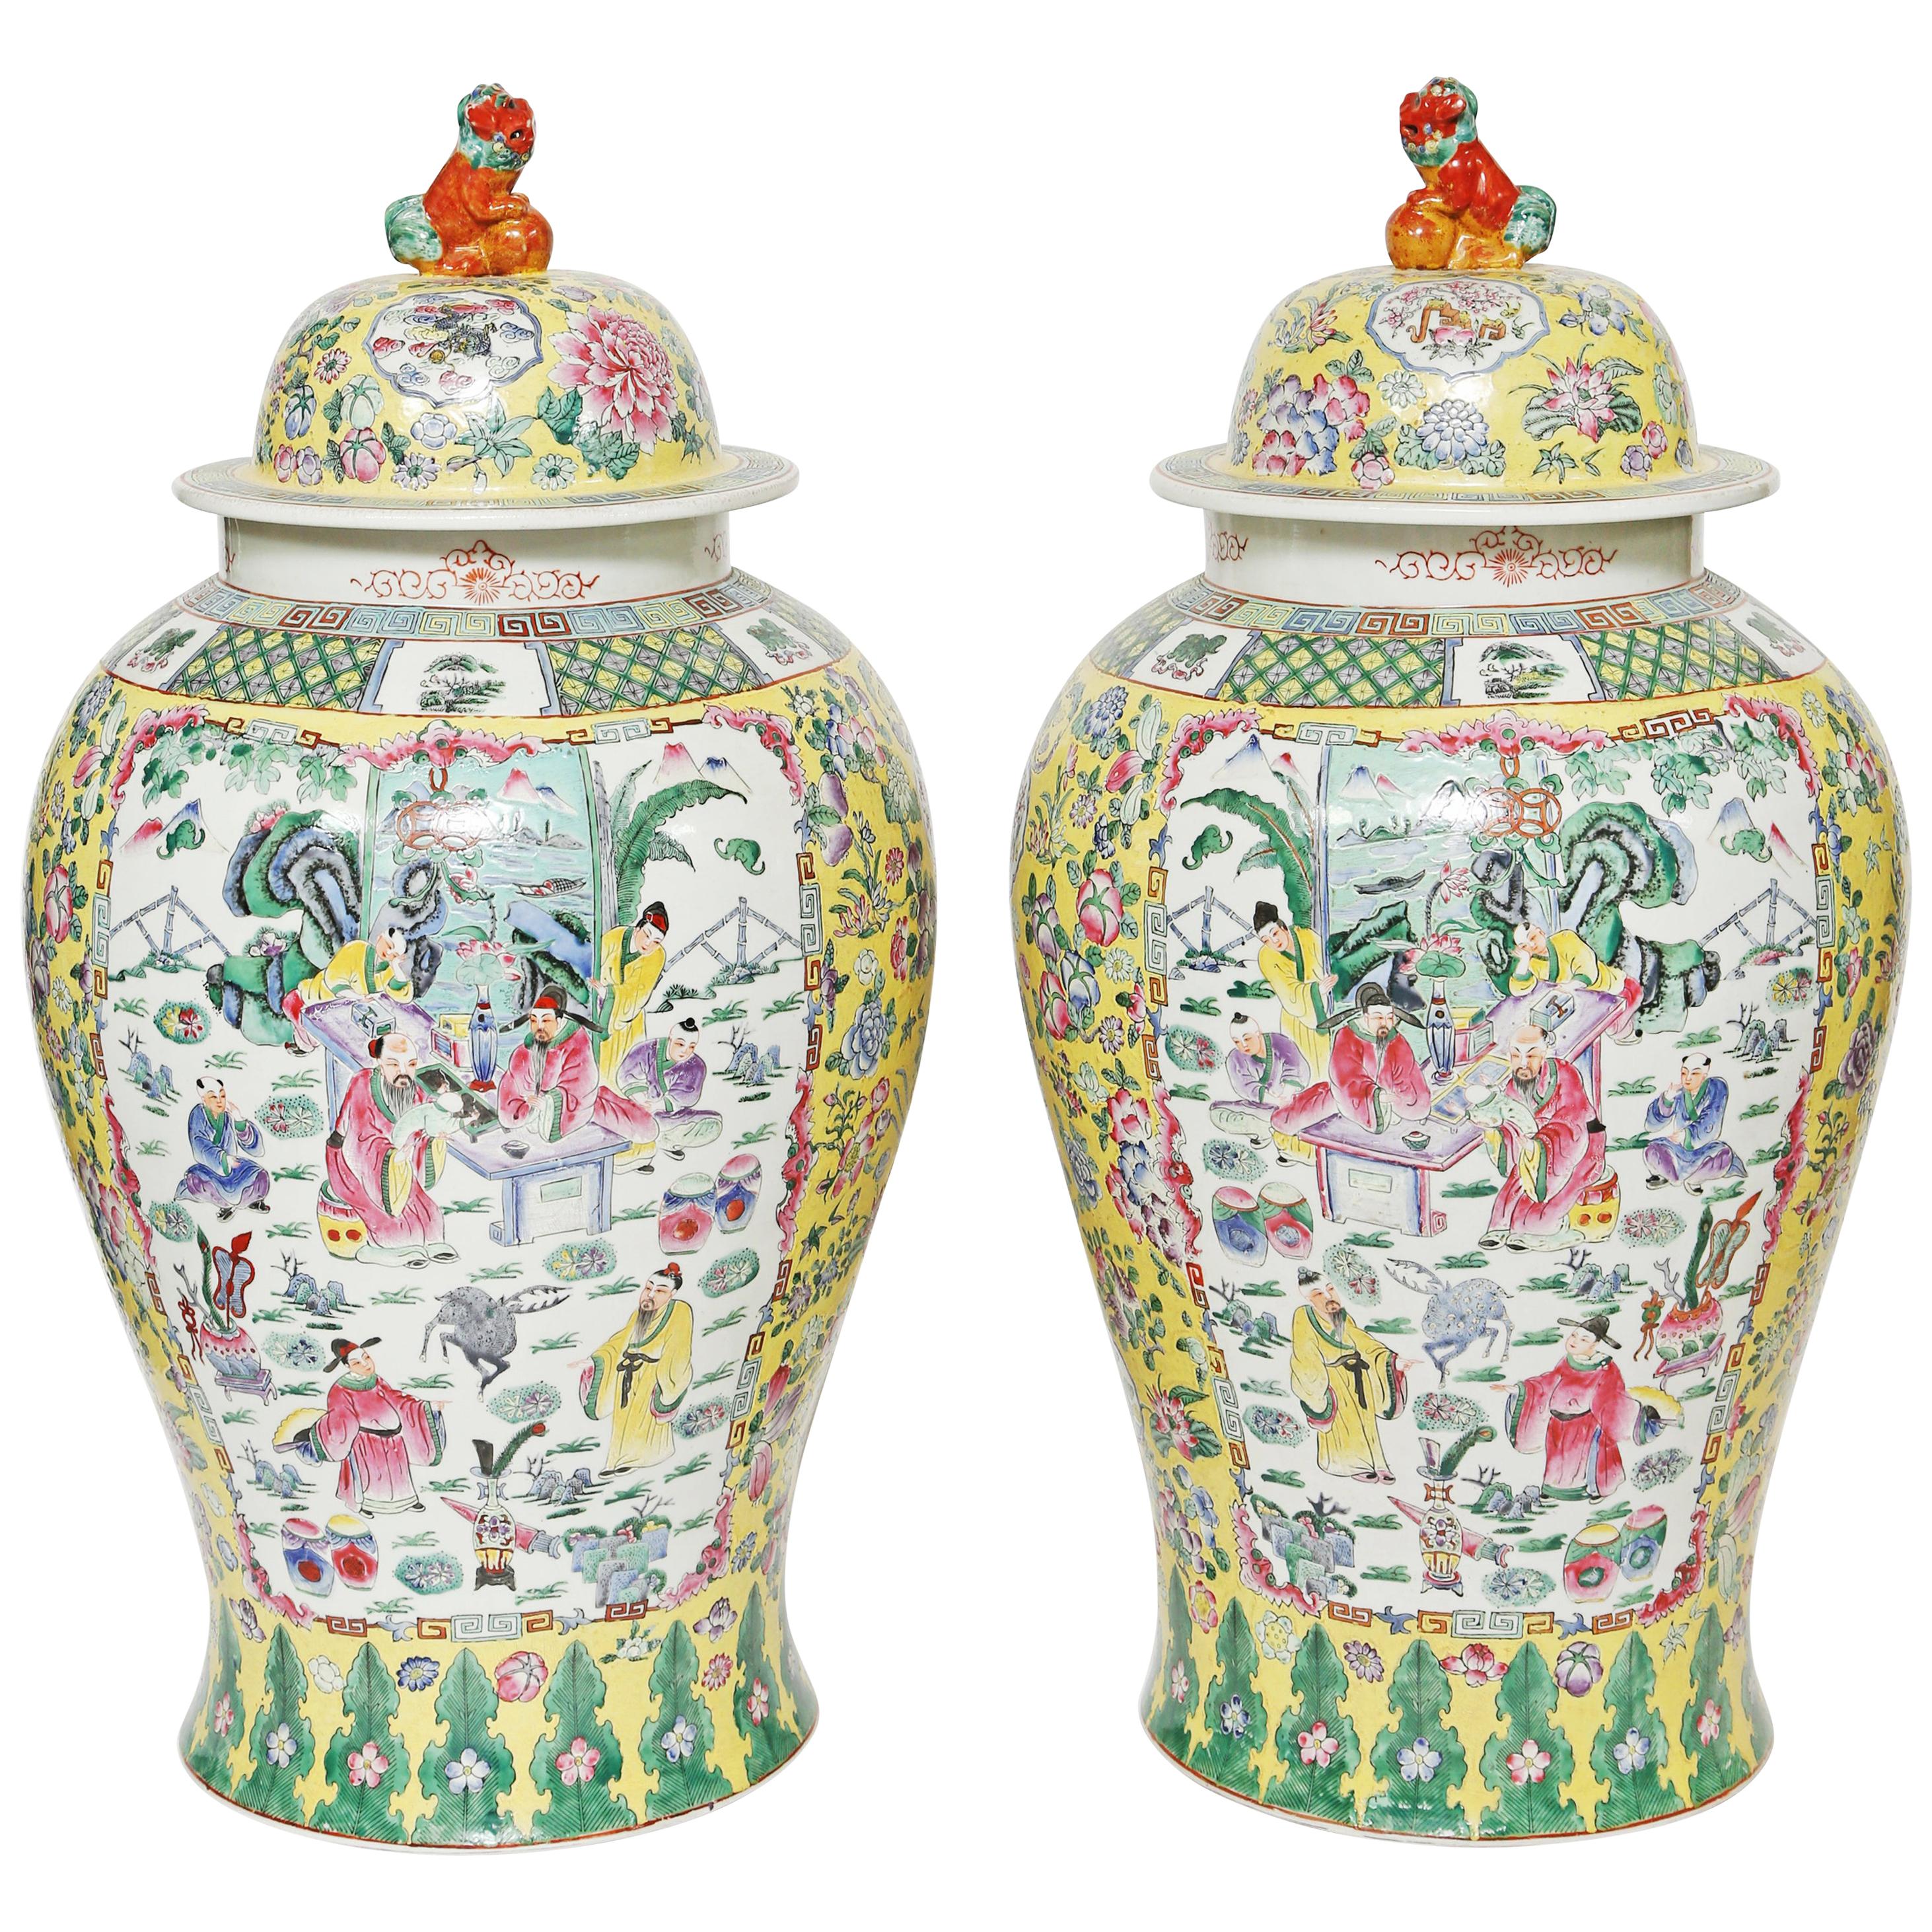  Pair of Chinese Polychromed Porcelain Temple Jars with Covers-30 1/2" Tall